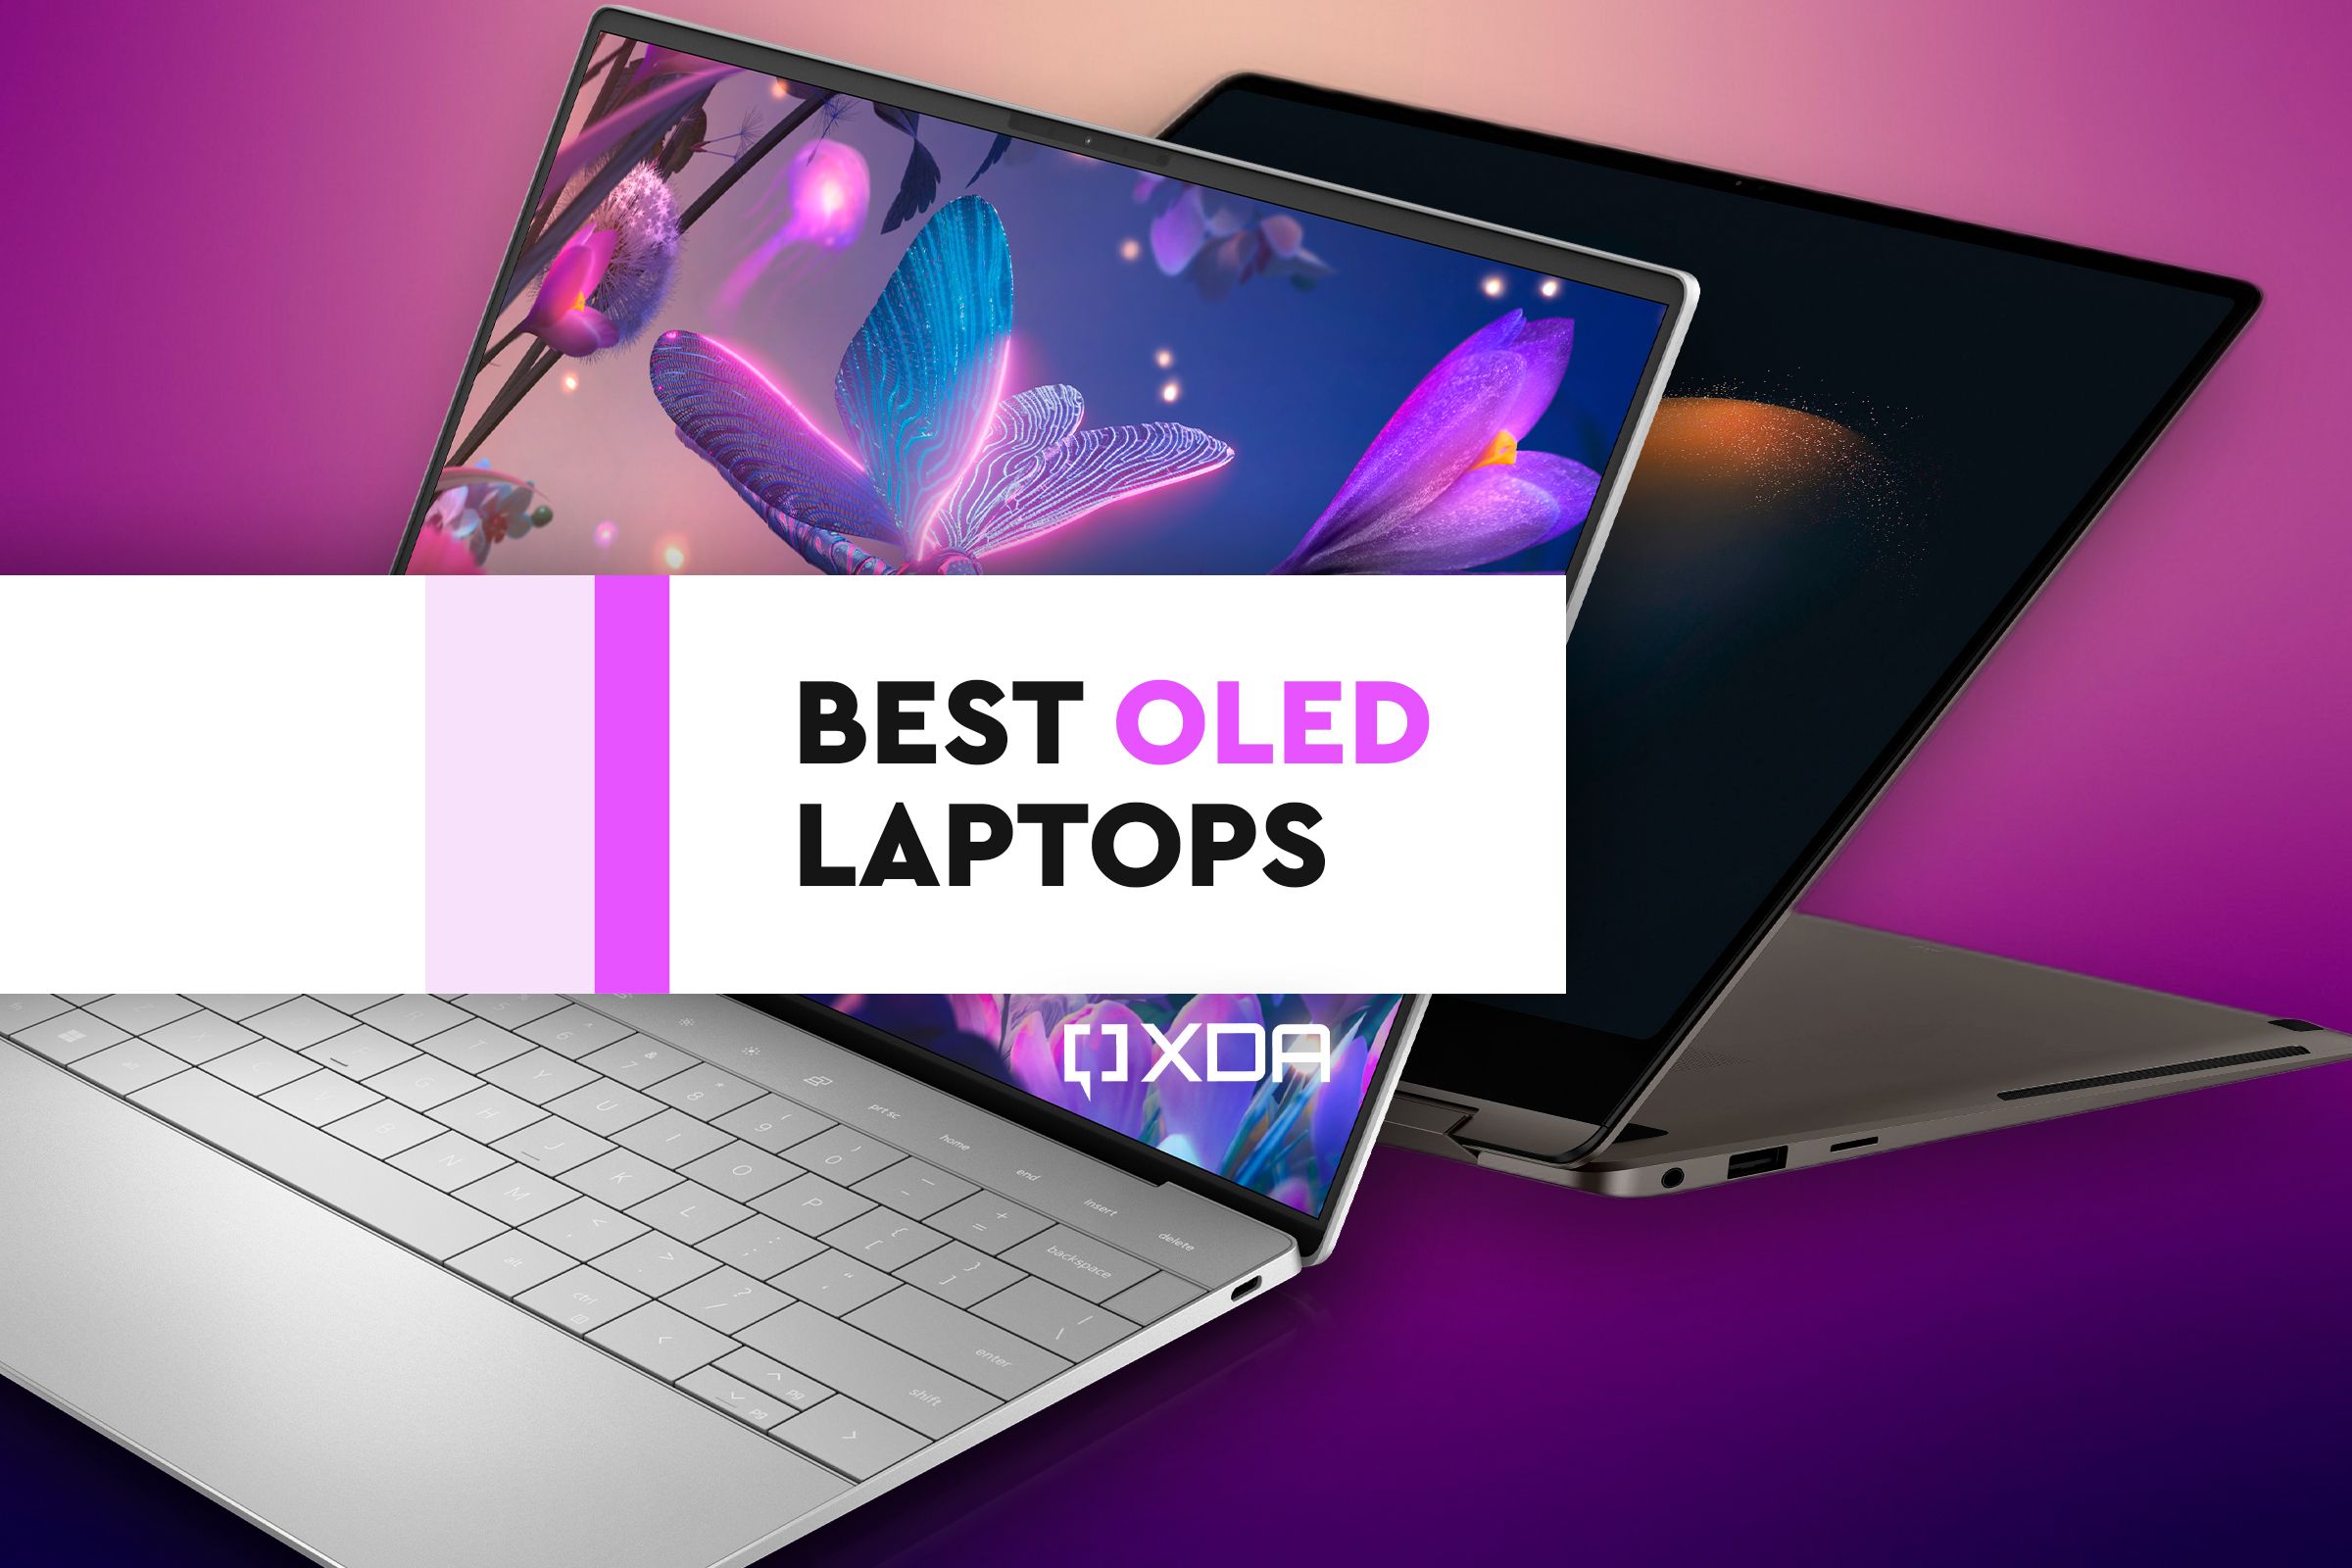 Dell XPS 15 review: This highly polished laptop is even better with OLED